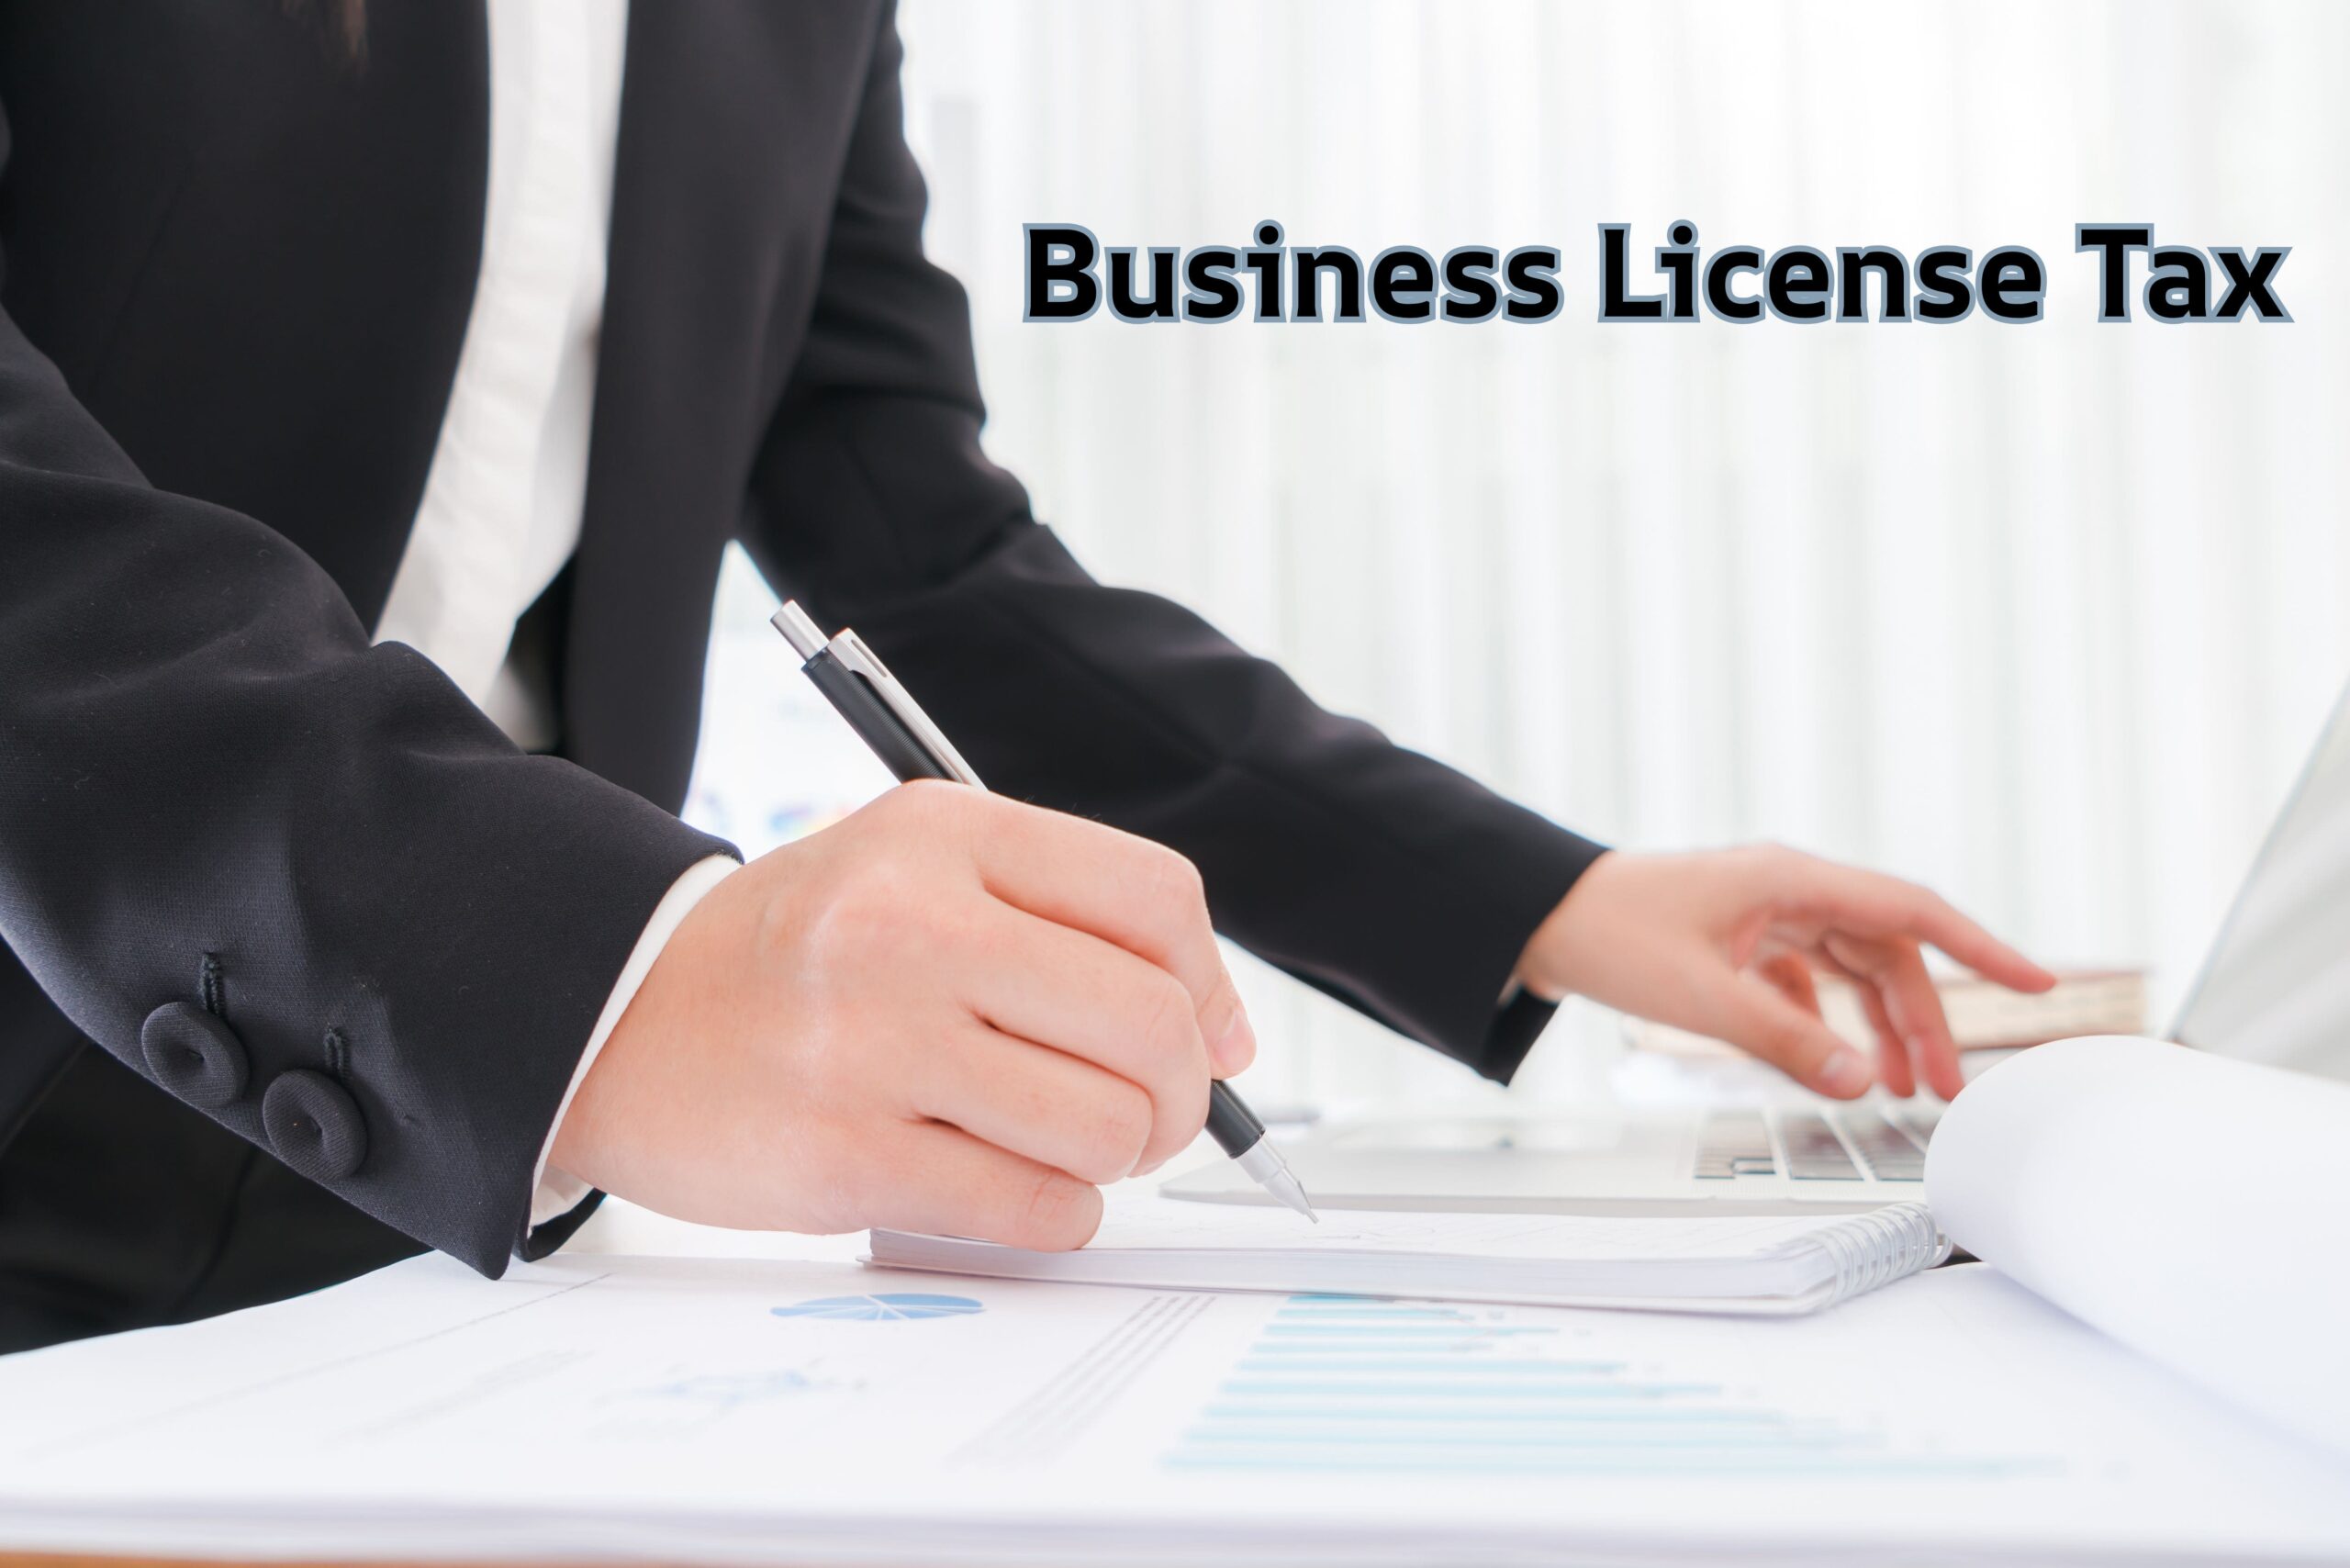 Decoding business license tax: What businesses and individuals need to know?